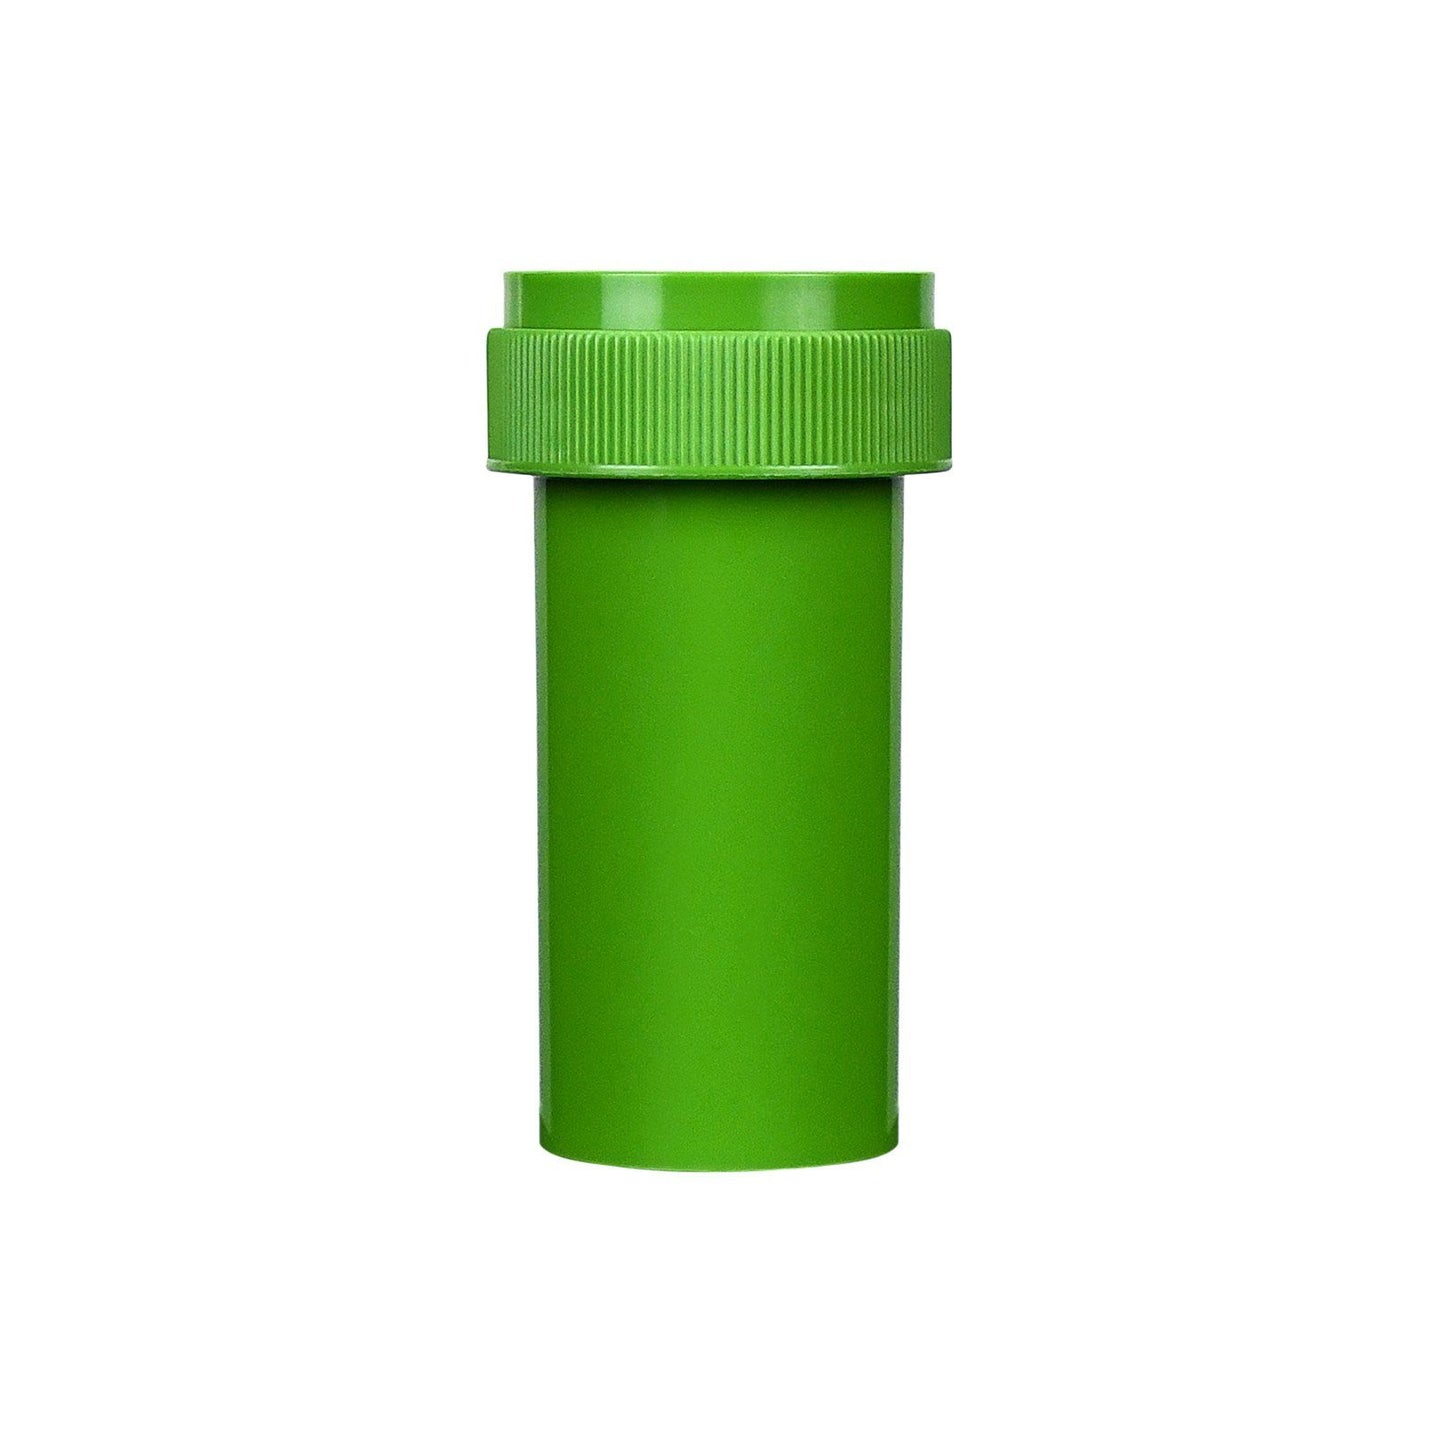 Opaque Green 13 Dram Reversible Cap Vials 275 COUNT at Flower Power Packages